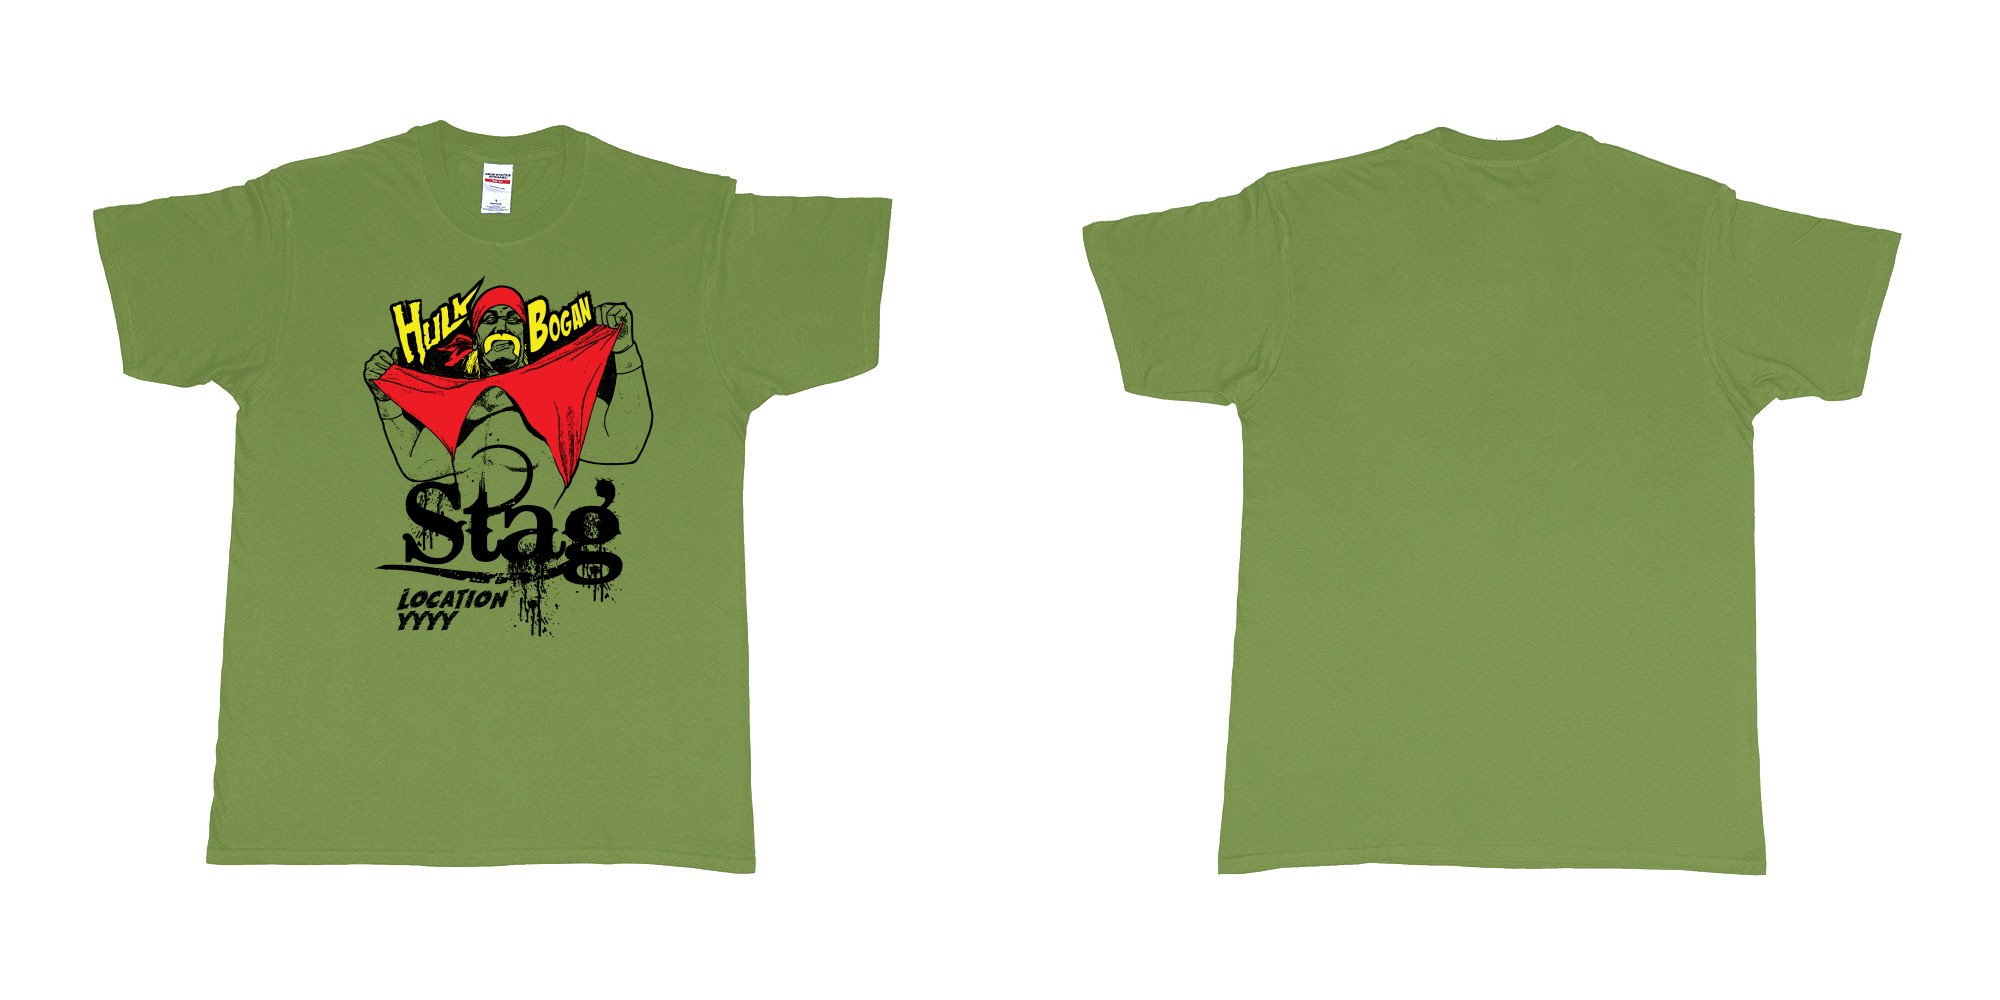 Custom tshirt design hulk hogan bogan in fabric color military-green choice your own text made in Bali by The Pirate Way